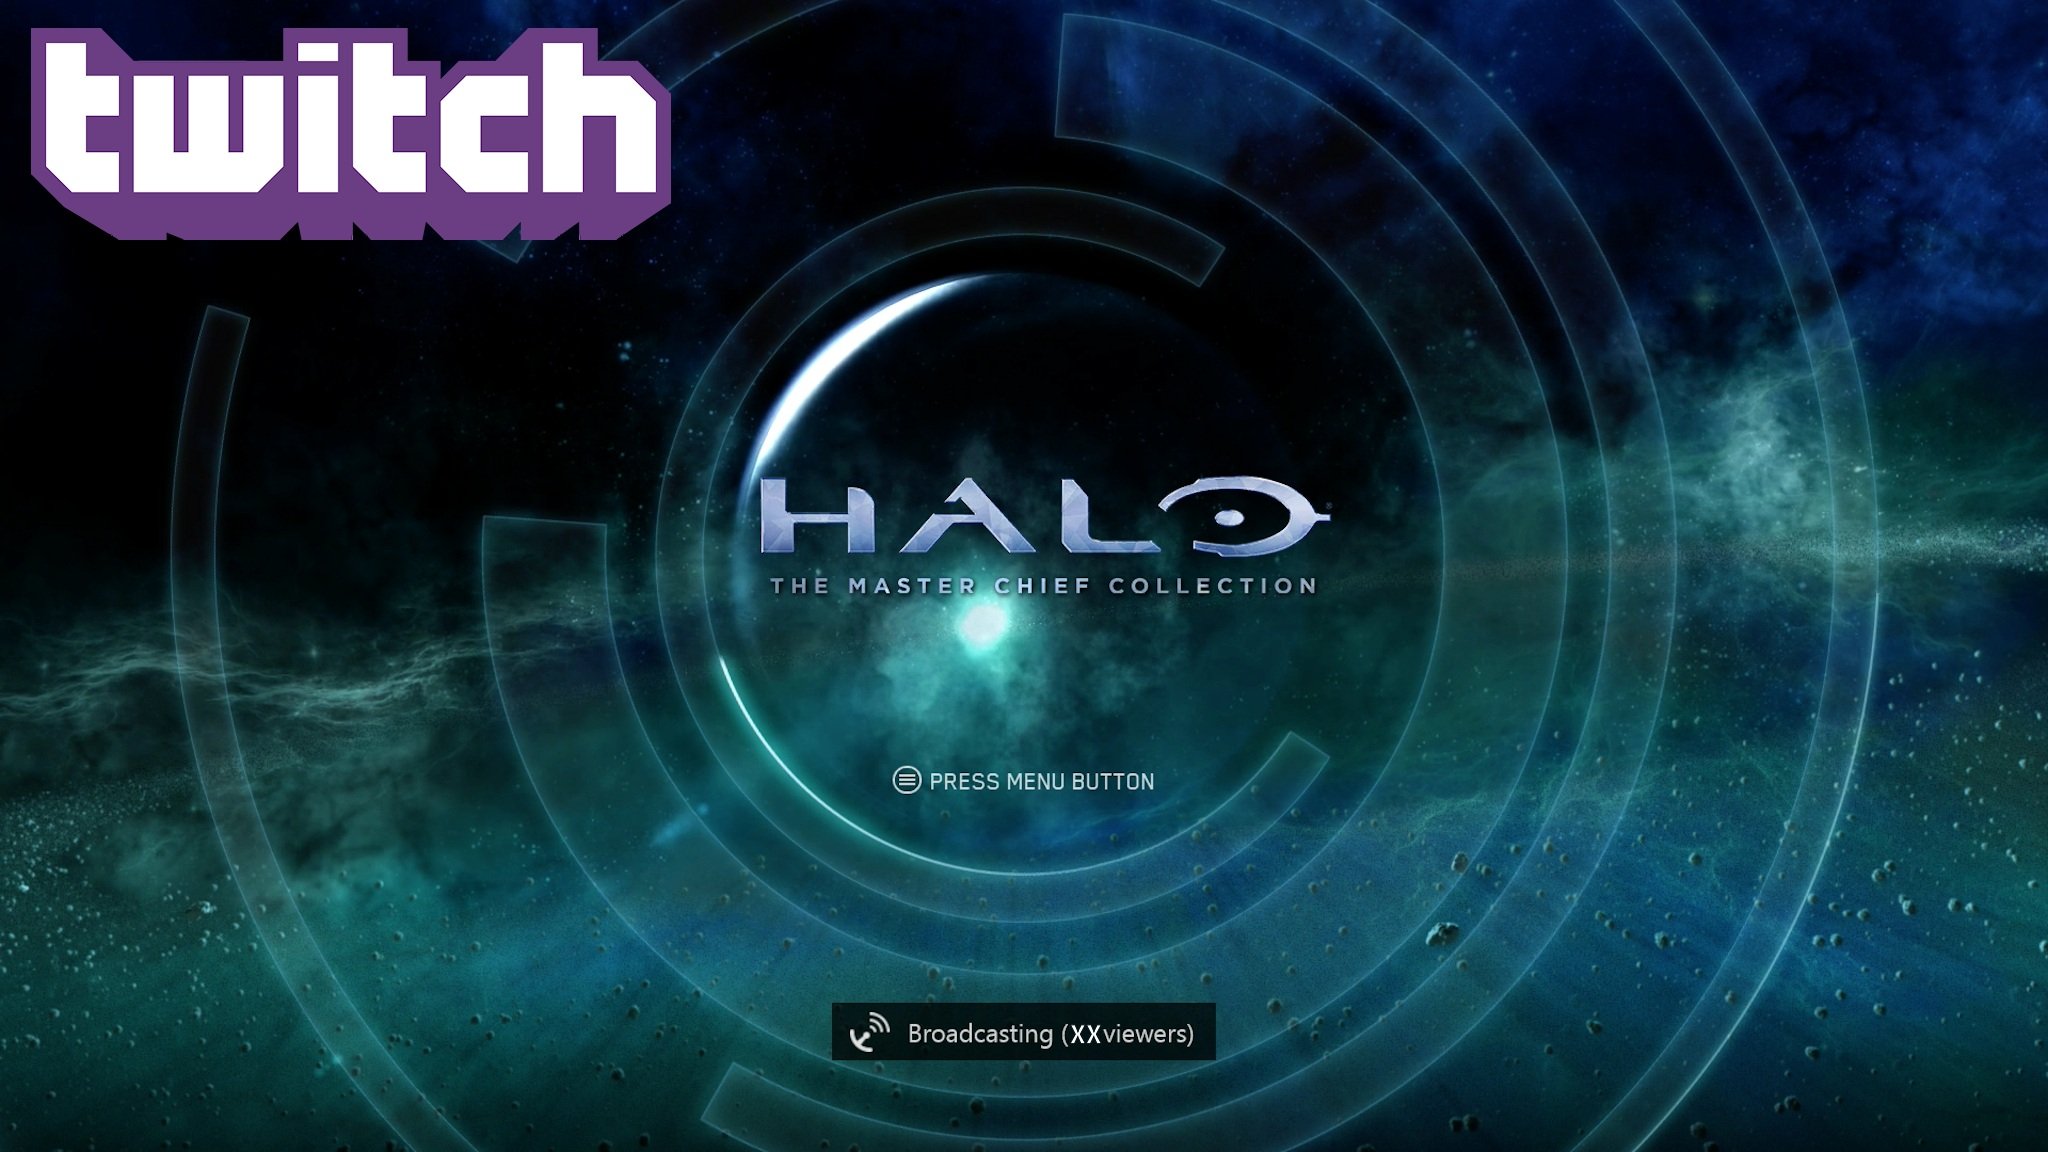 Halo_Master_Chief_Collection_title_Twitch_0.jpg